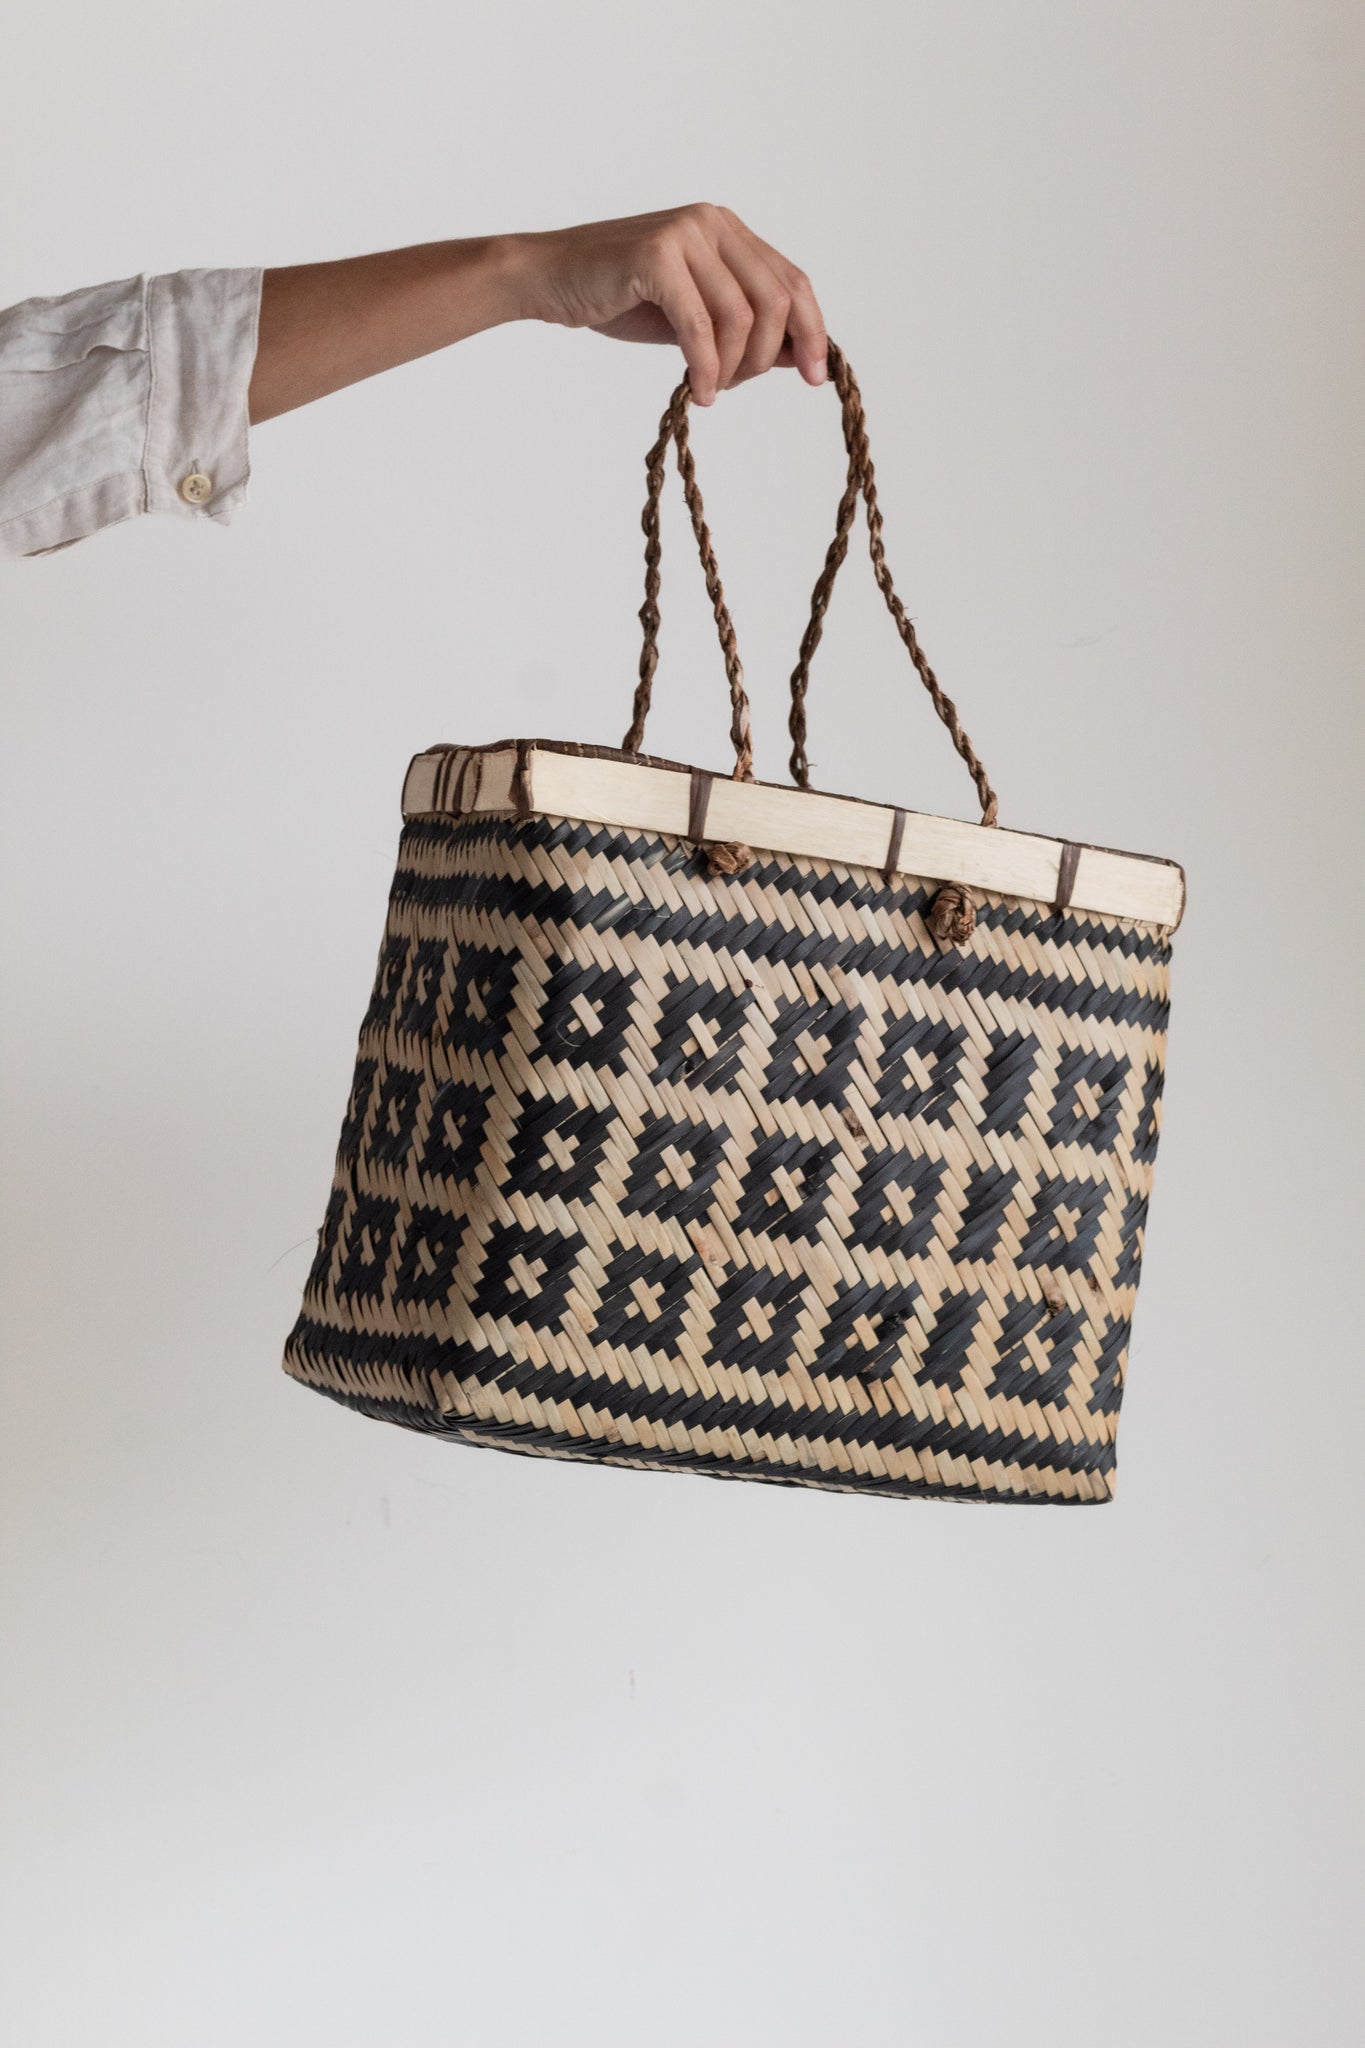 Guarani Baskets: Handcrafts from the Argentinian Jungle